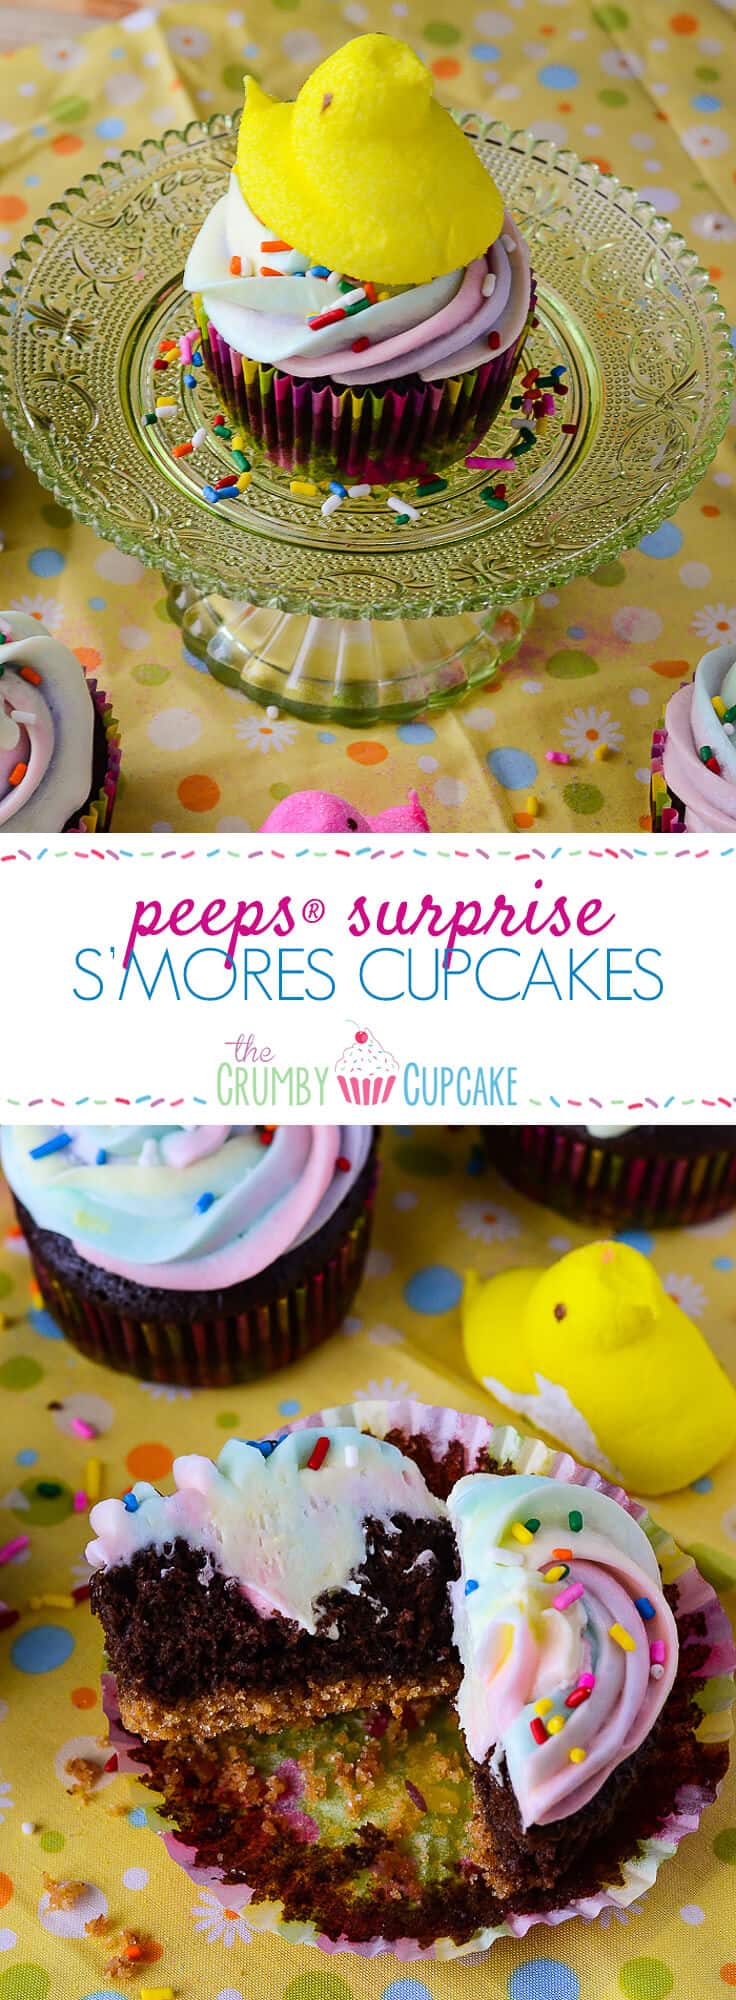 PEEPS® Surprise S'mores Cupcakes?! These sweet little chocolate & graham cracker cupcakes contain a secret surprise - they're filled & iced with PEEPS®!